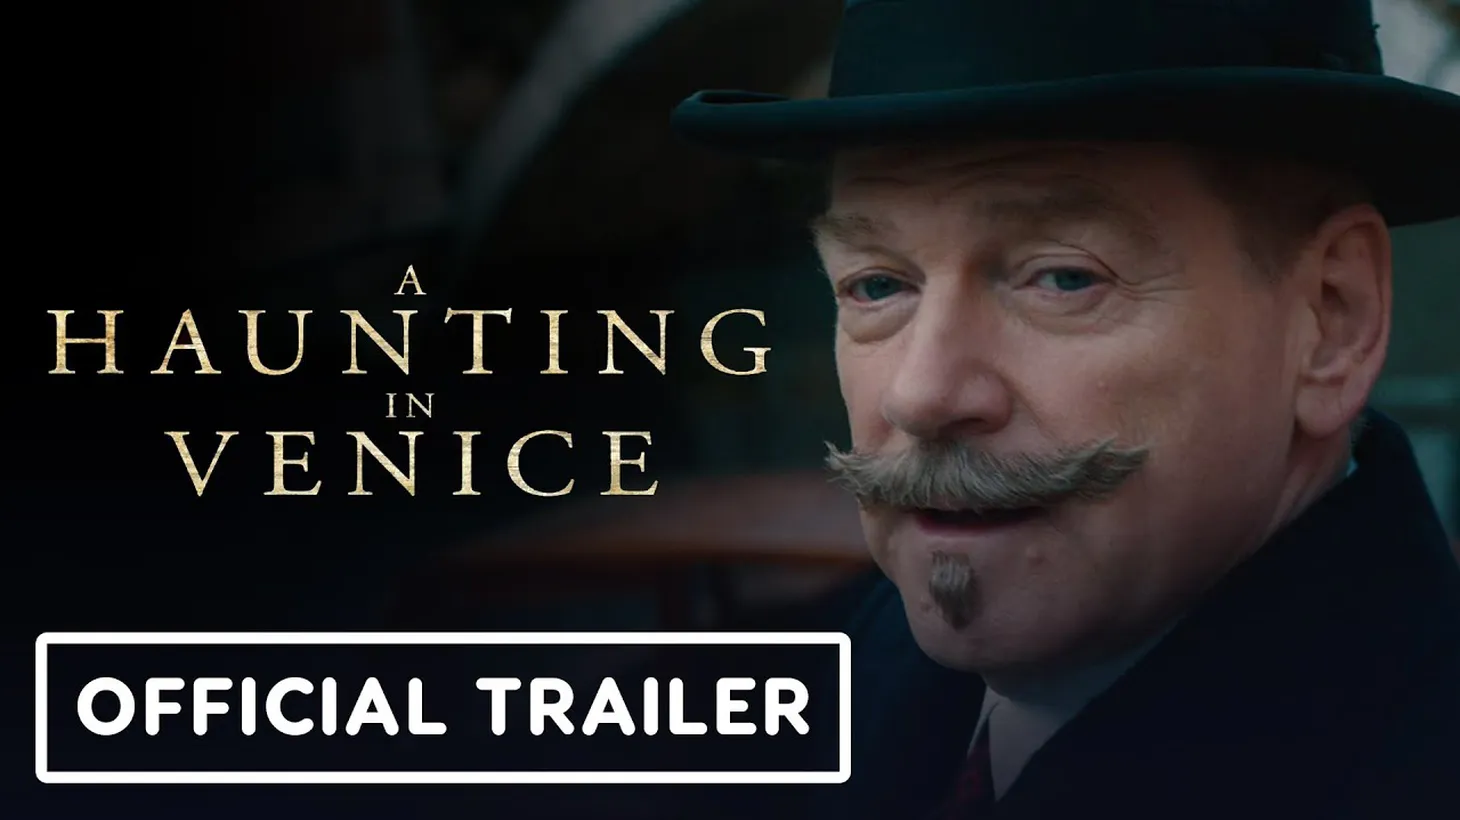 In “A Haunting in Venice,” Kenneth Branagh again stars as detective Hercule Poirot, who is investigating a murder at a séance, set 10 years after “Death on the Nile.”